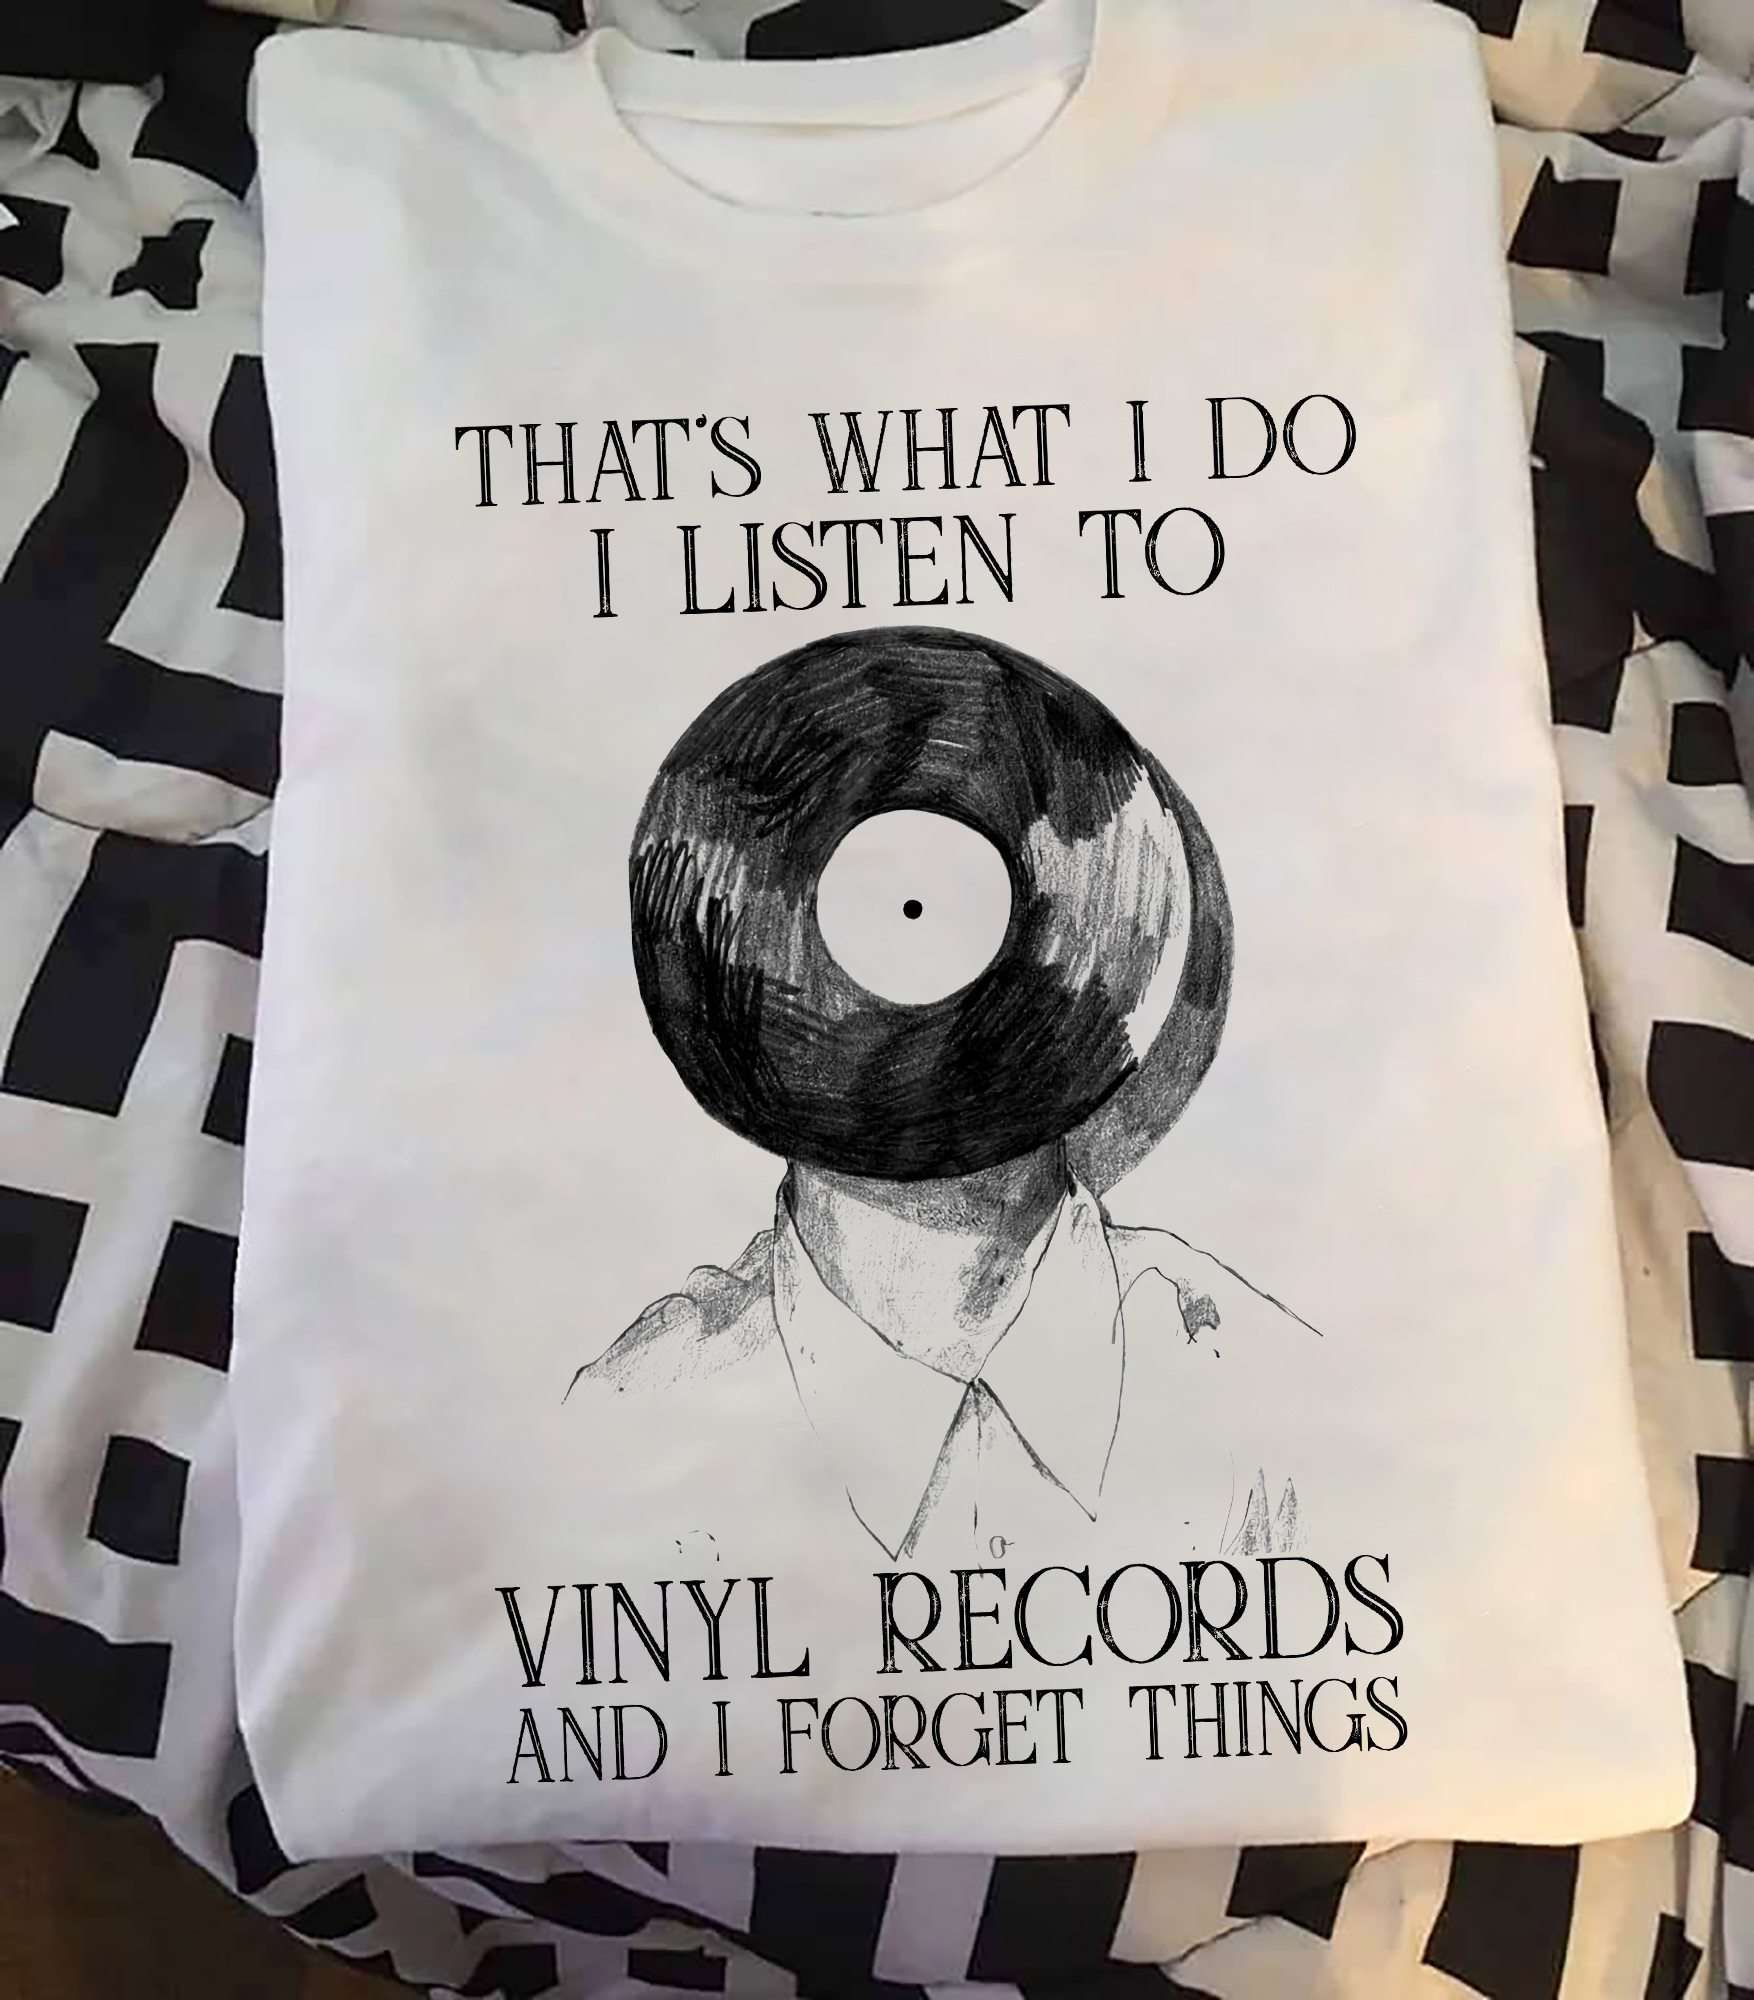 That's what I do I listen to Vinyl records and I forget things - Vinyl record lover, listening to vinyl record